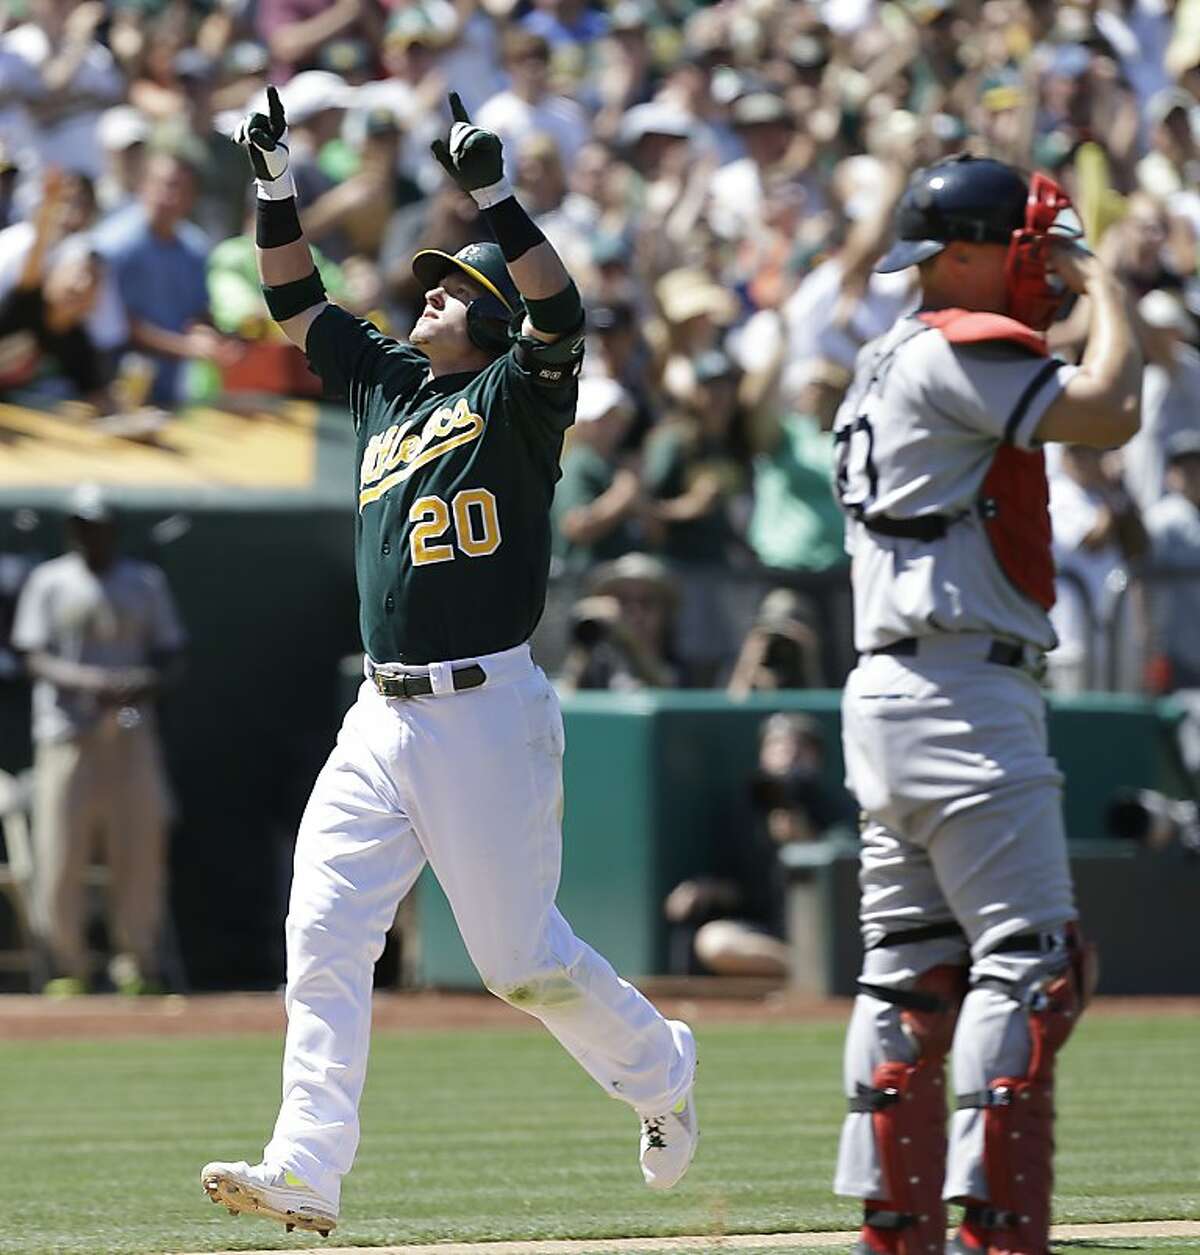 Oakland Athletics' Josh Donaldson (20) celebrates after hitting a two-run home run off Boston Red Sox's Brandon Workman in the seventh inning of a baseball game Sunday, July 14, 2013, in Oakland, Calif. (AP Photo/Ben Margot)